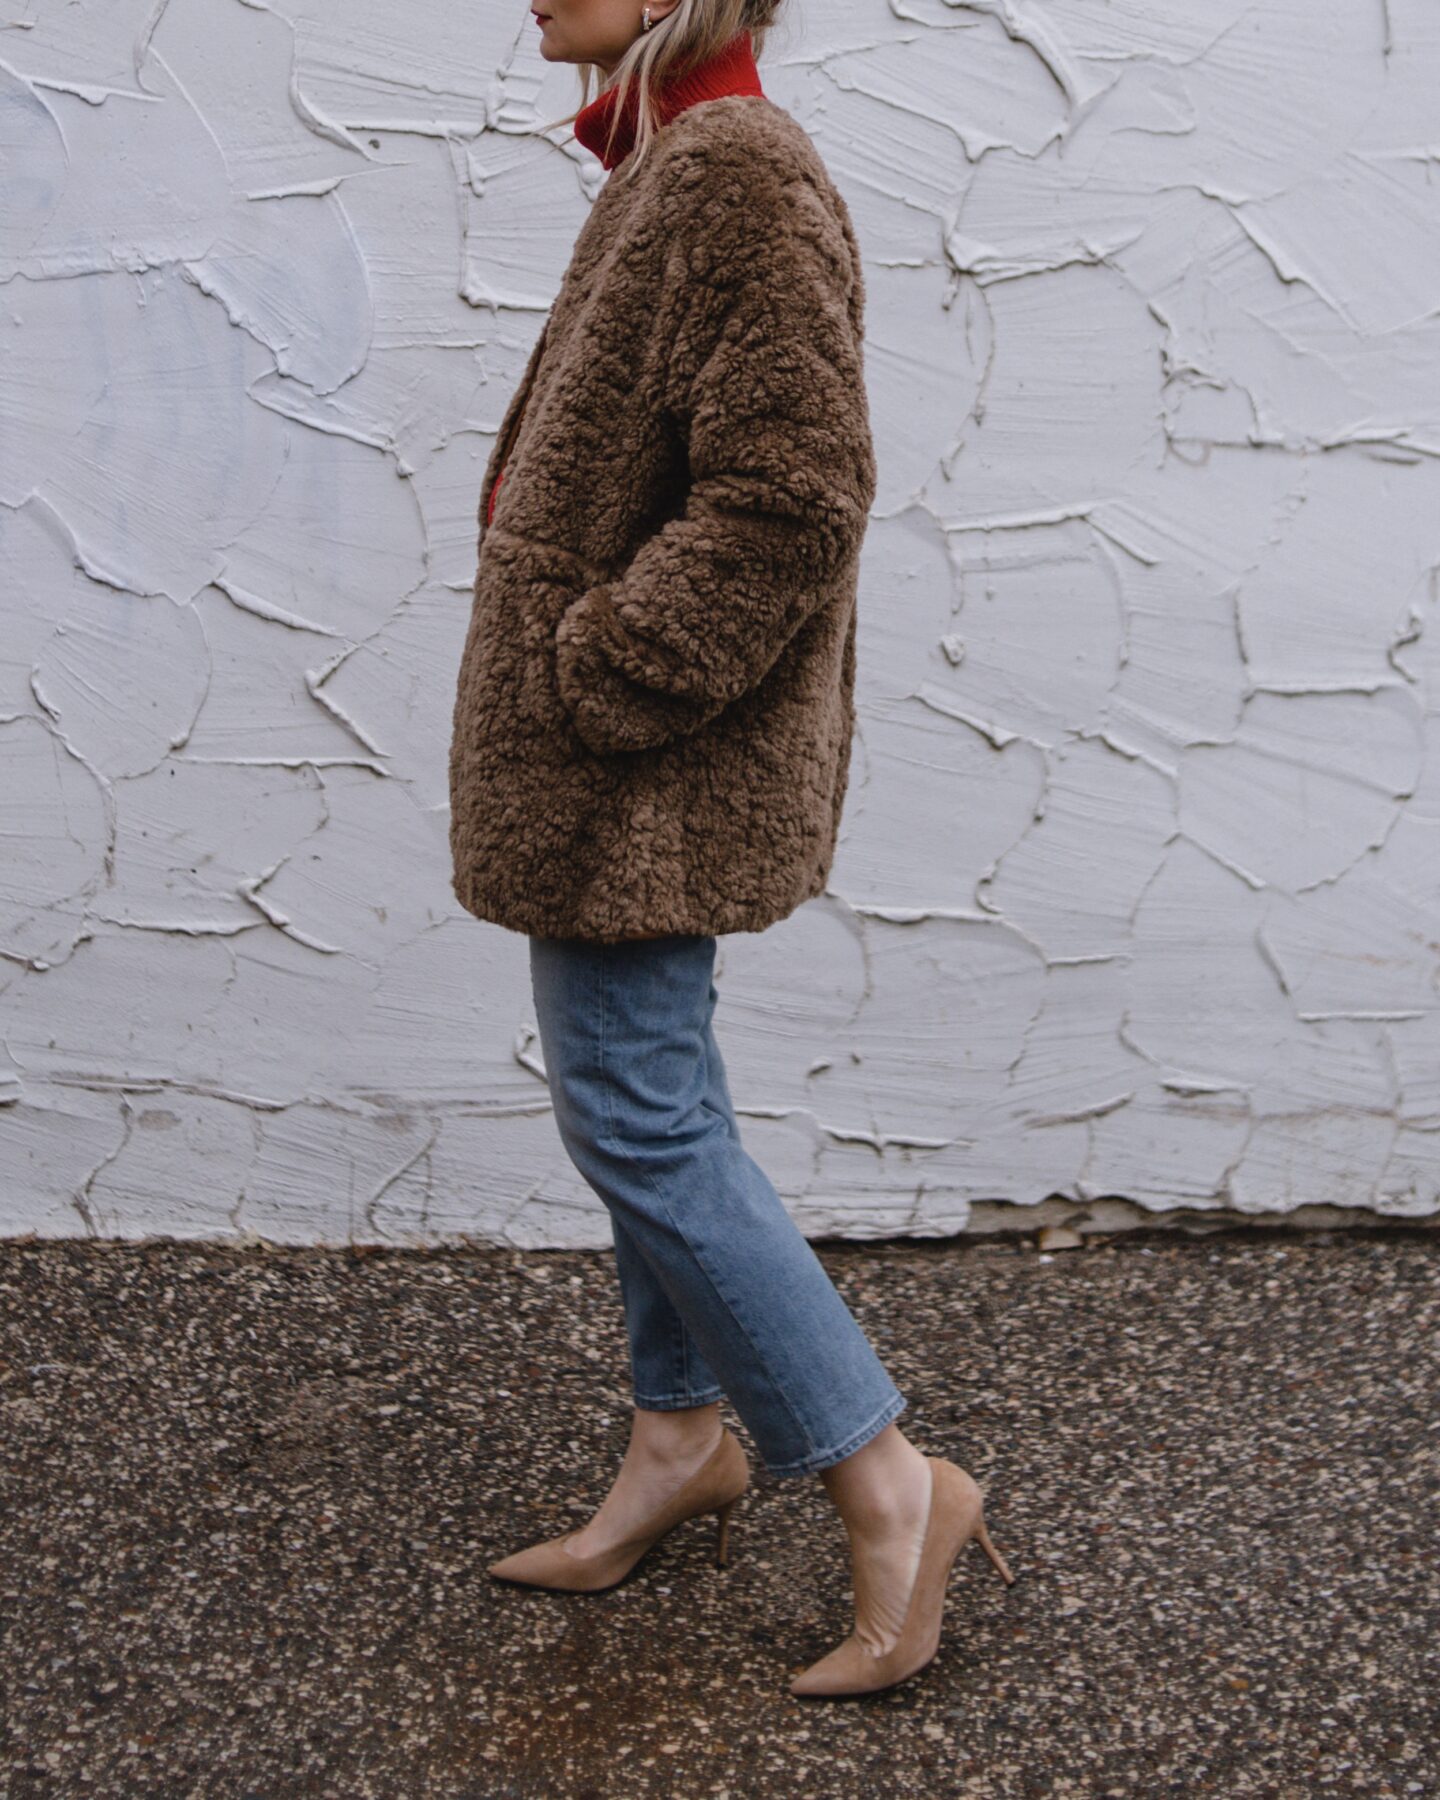 Karin Emily wears a red cashmere sweater, camel colored sherpa coat, and mid wash straight leg jeans, and nude suede heels